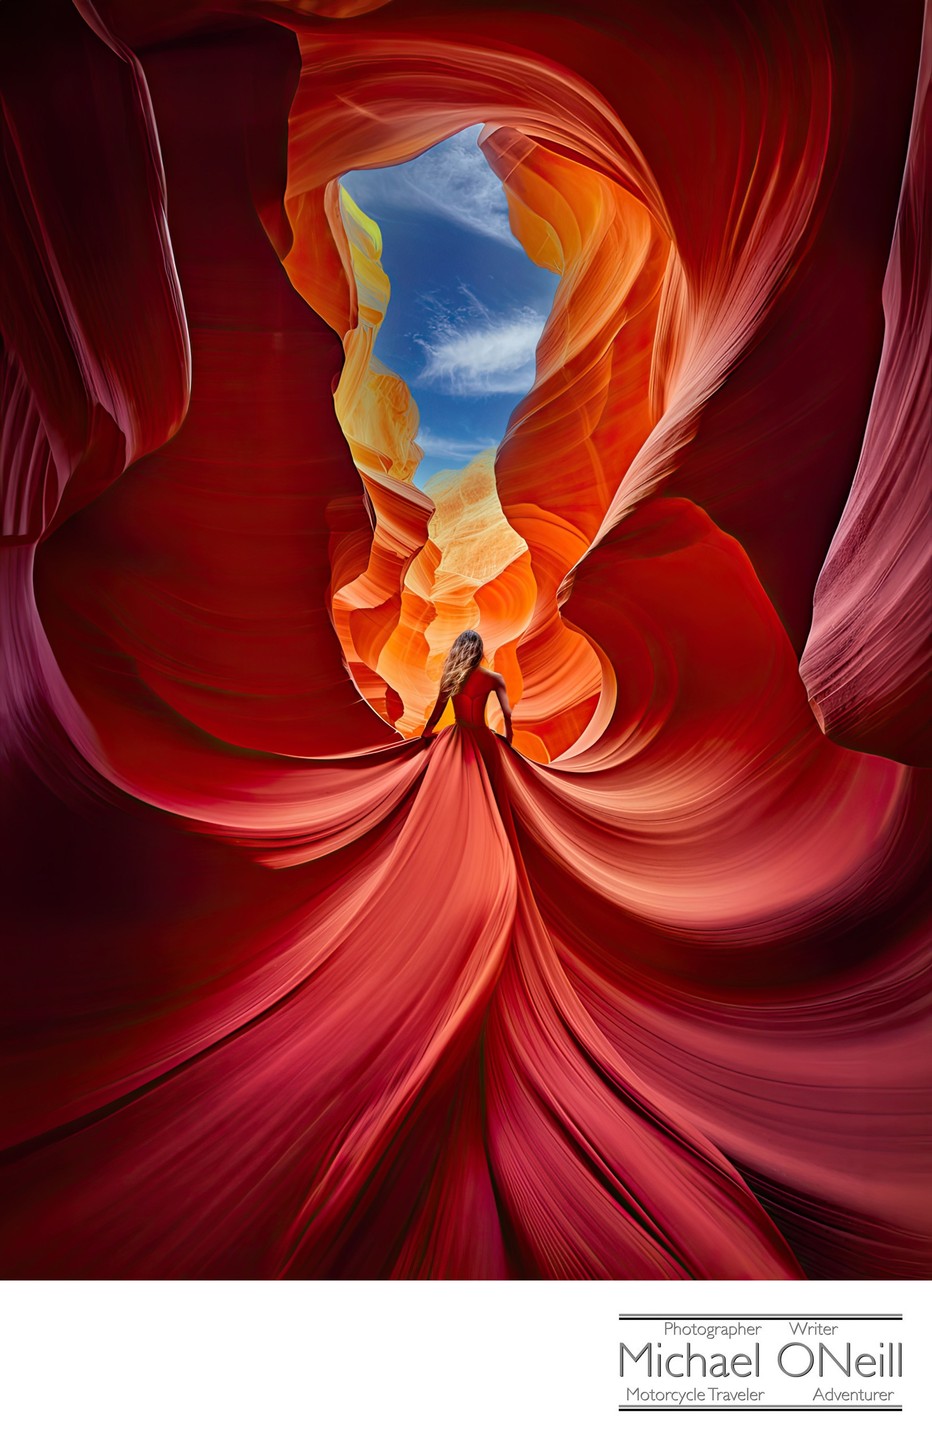 Slot Canyon Dream • Computer-Generated Image Morphs Feminine Beauty With Nature